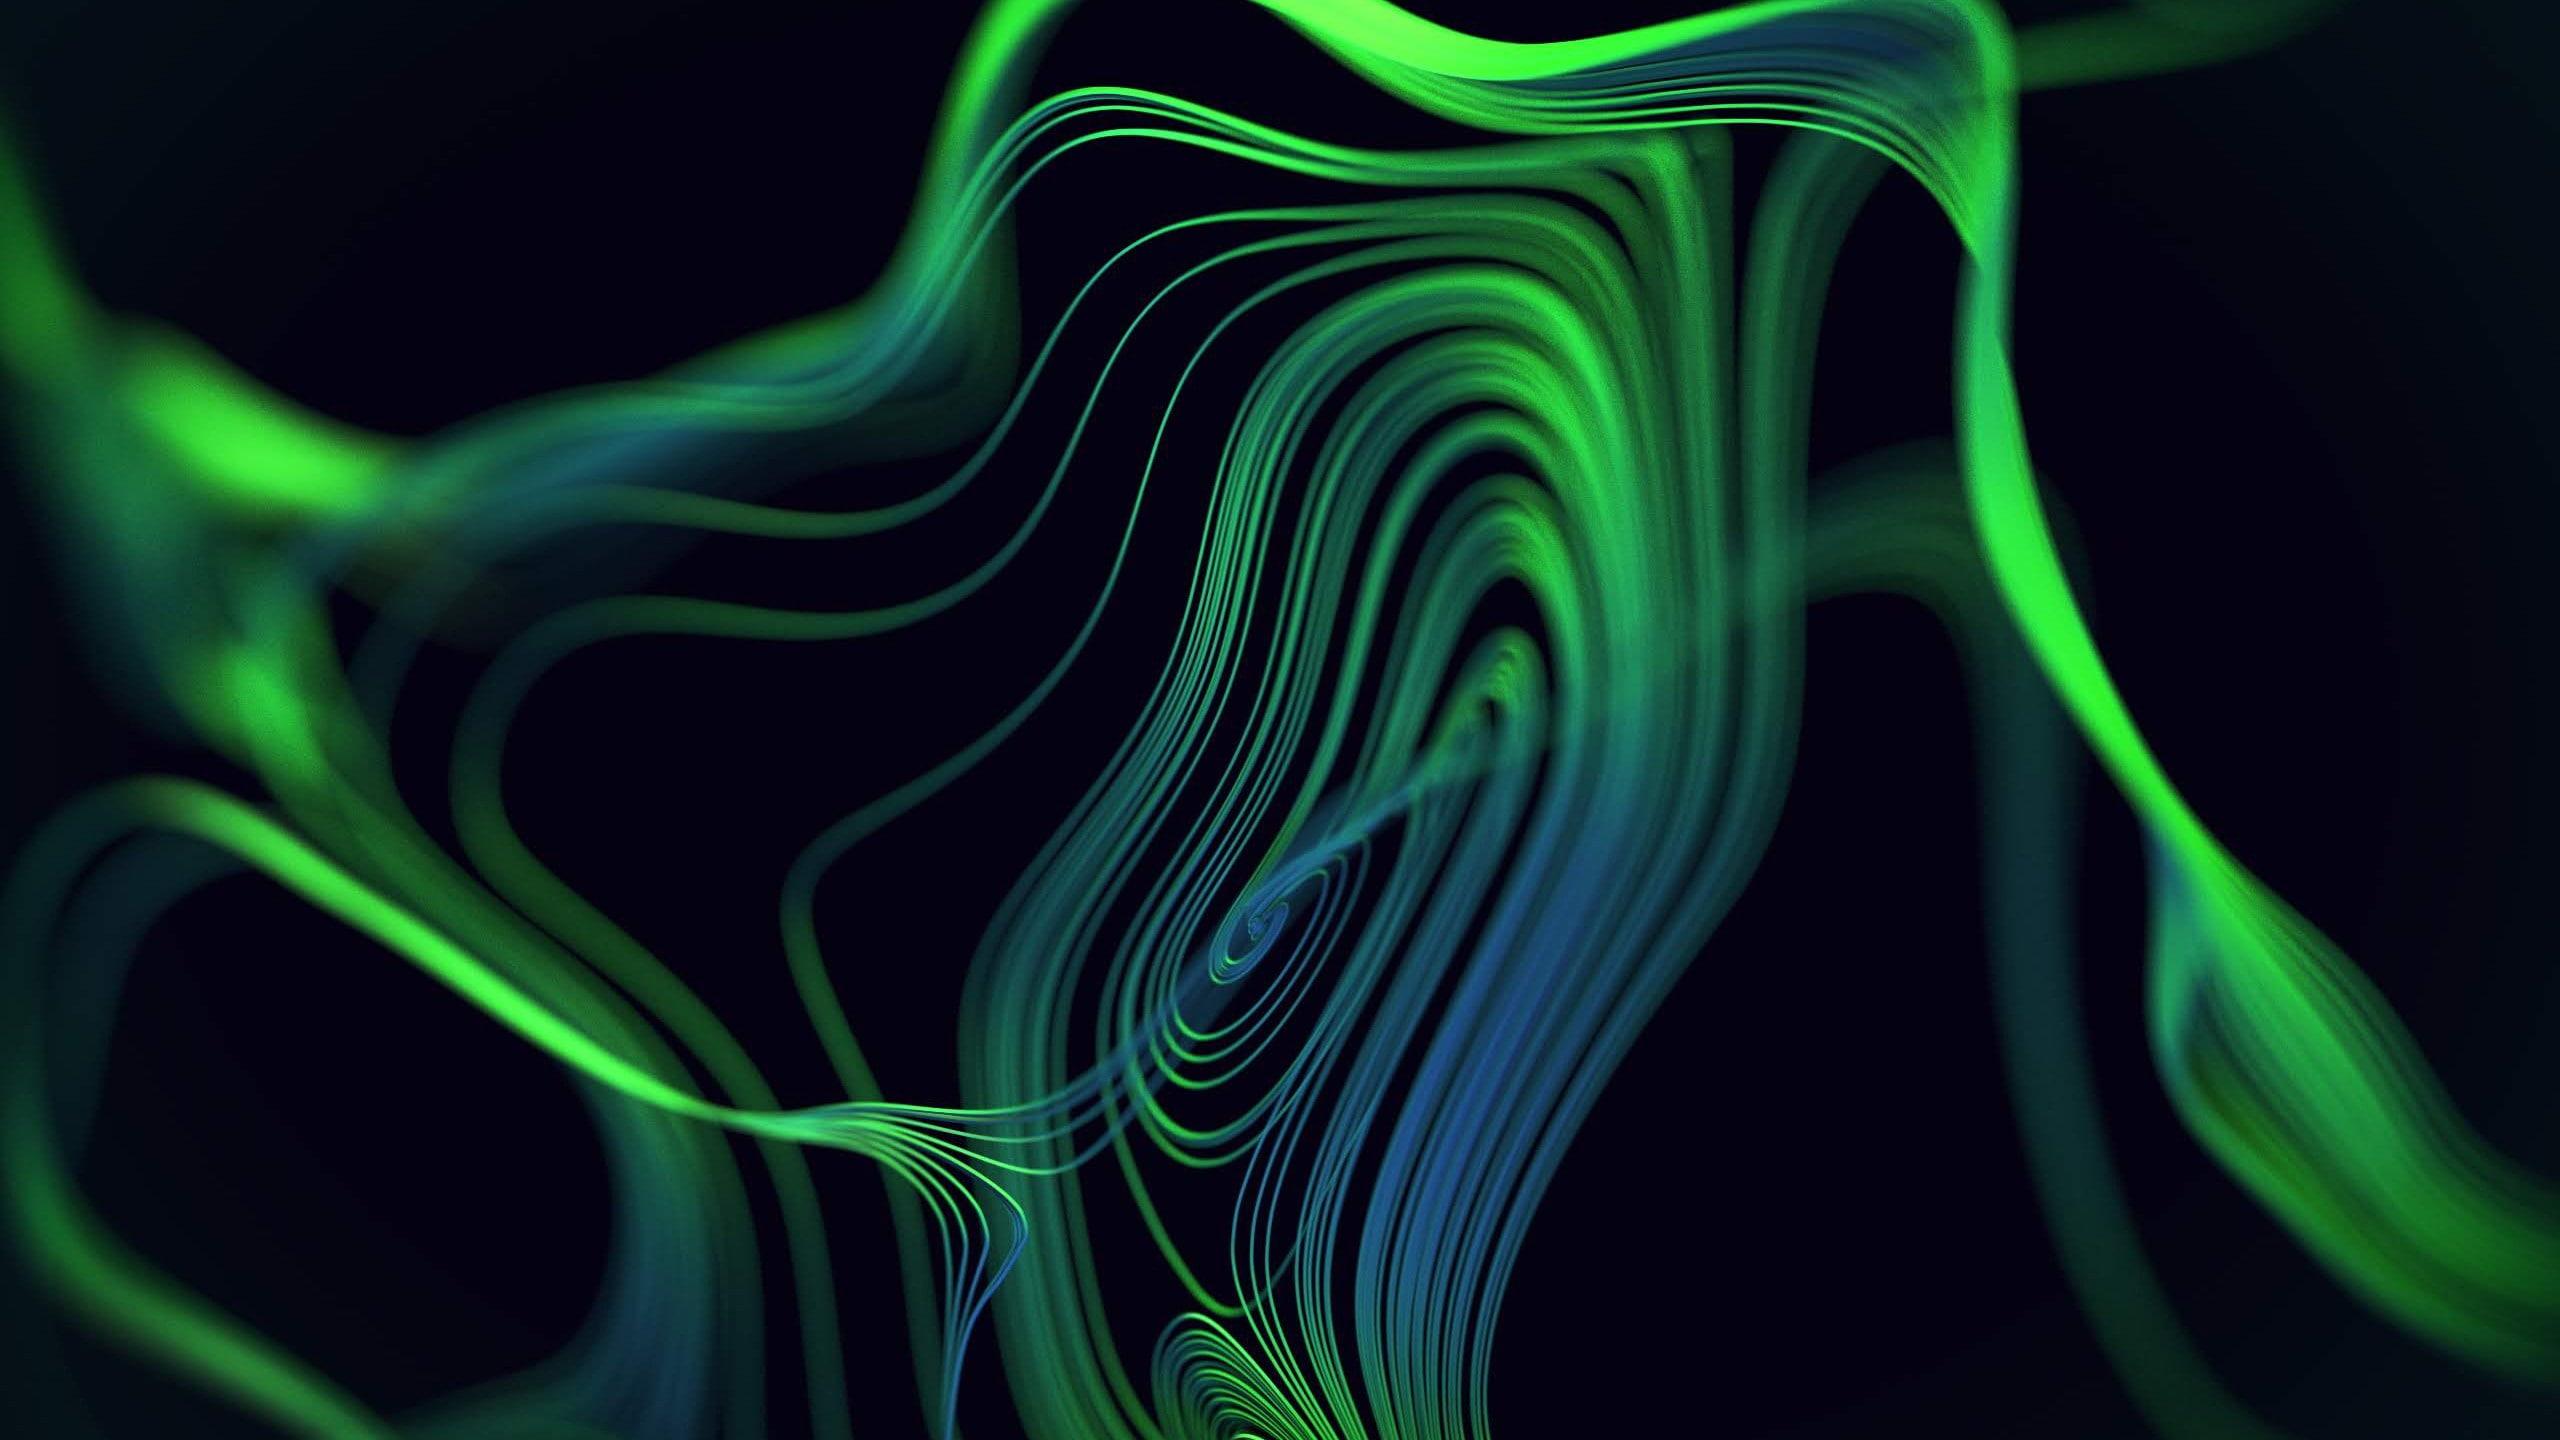 1280x800px. free download. HD wallpaper: Razer Phone abstract